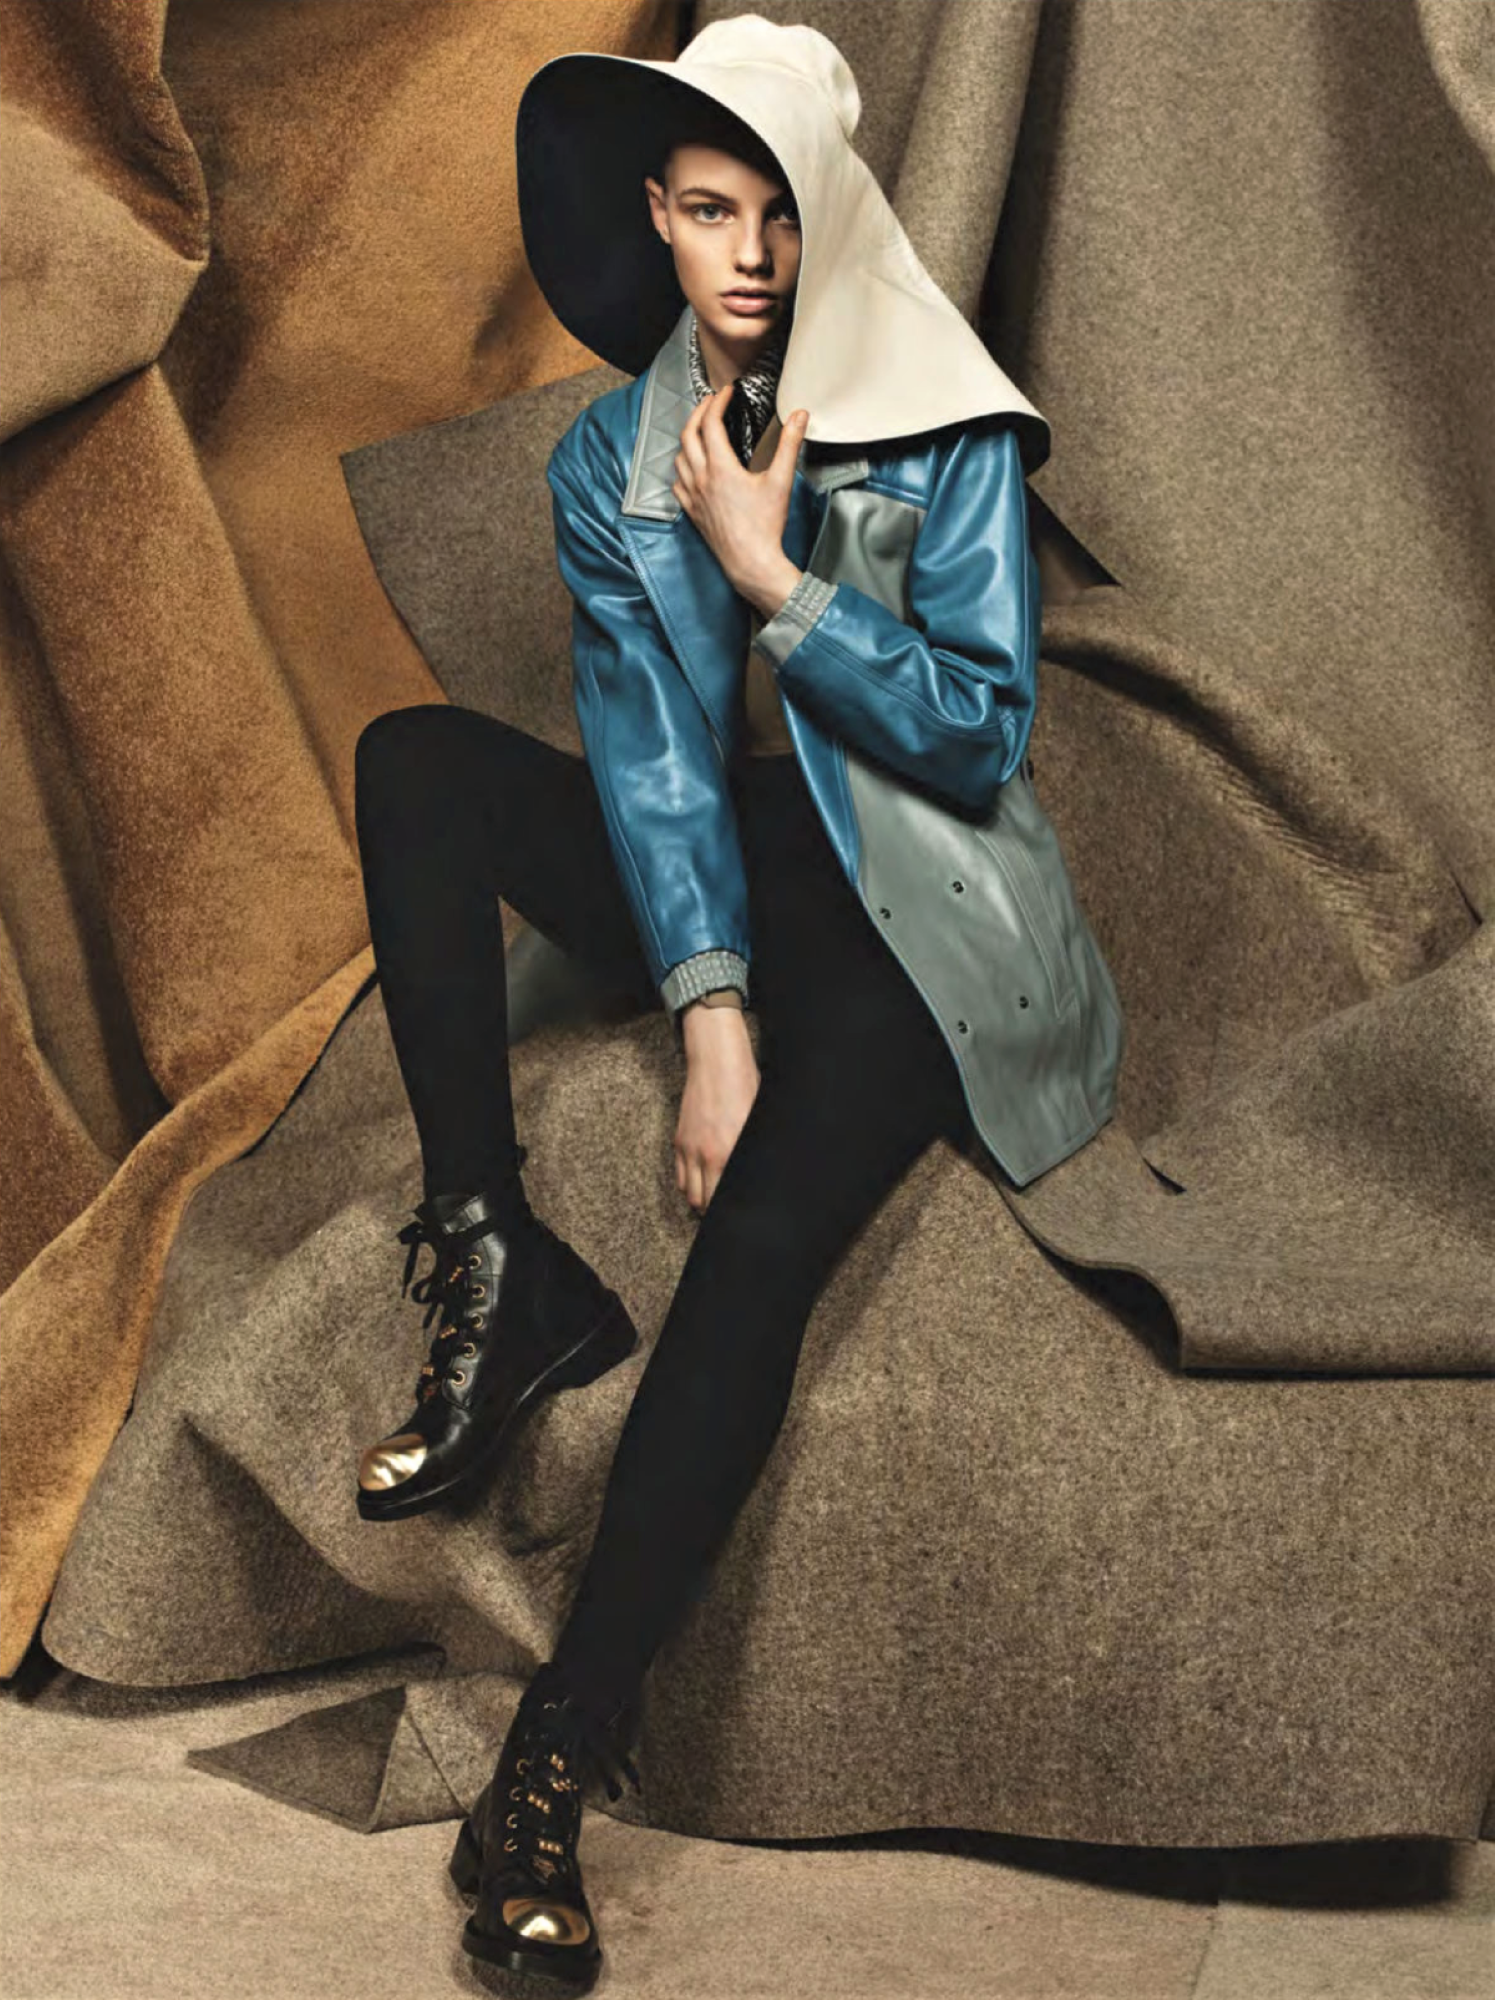 Vittoria Ceretti,Fran Summers,Vogue UK January 2020 (8).png